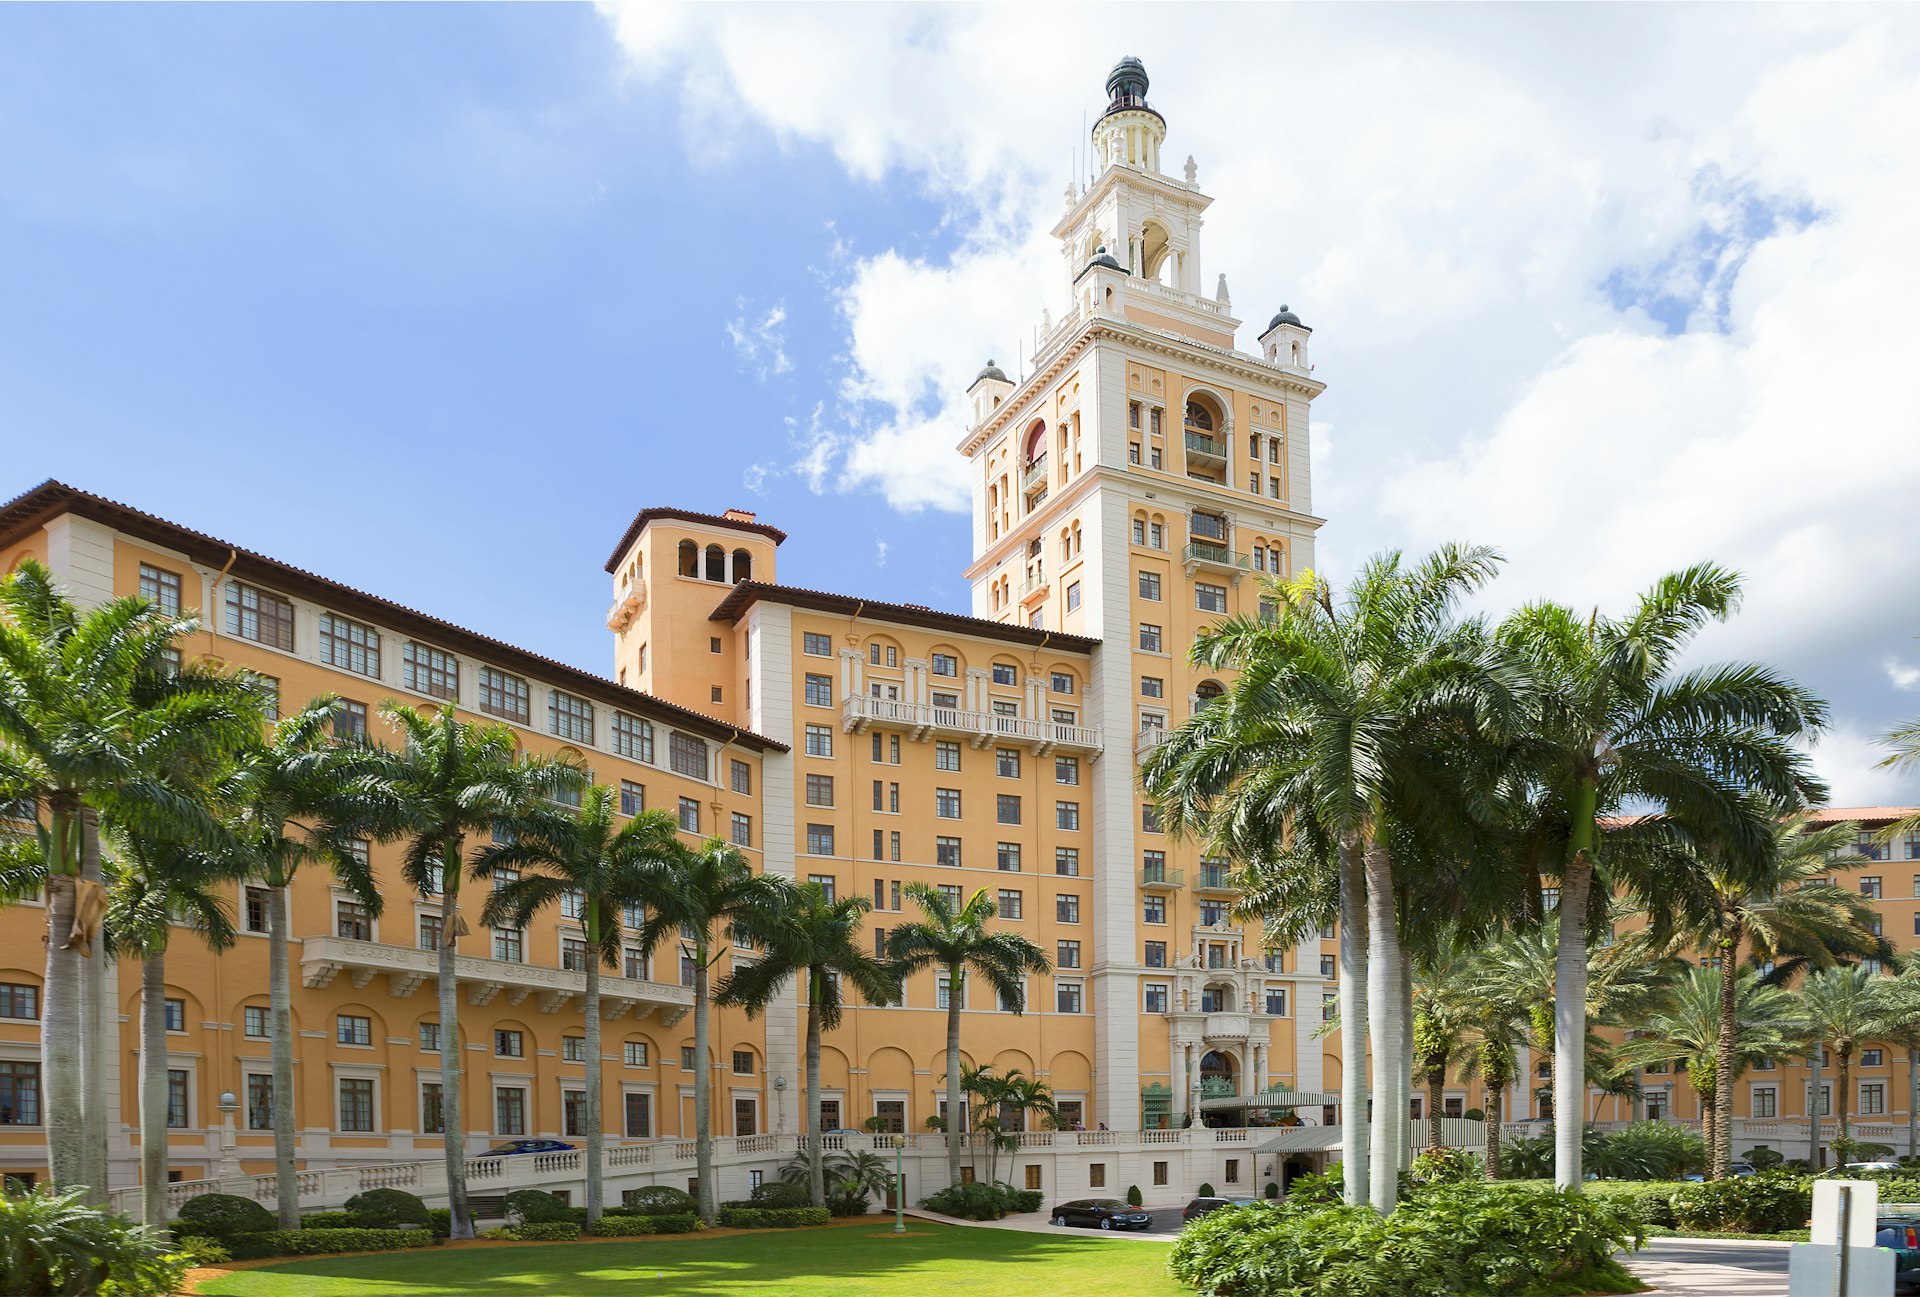 A huge pastel-colored hotel building with a central pointed tower in tropical gardens